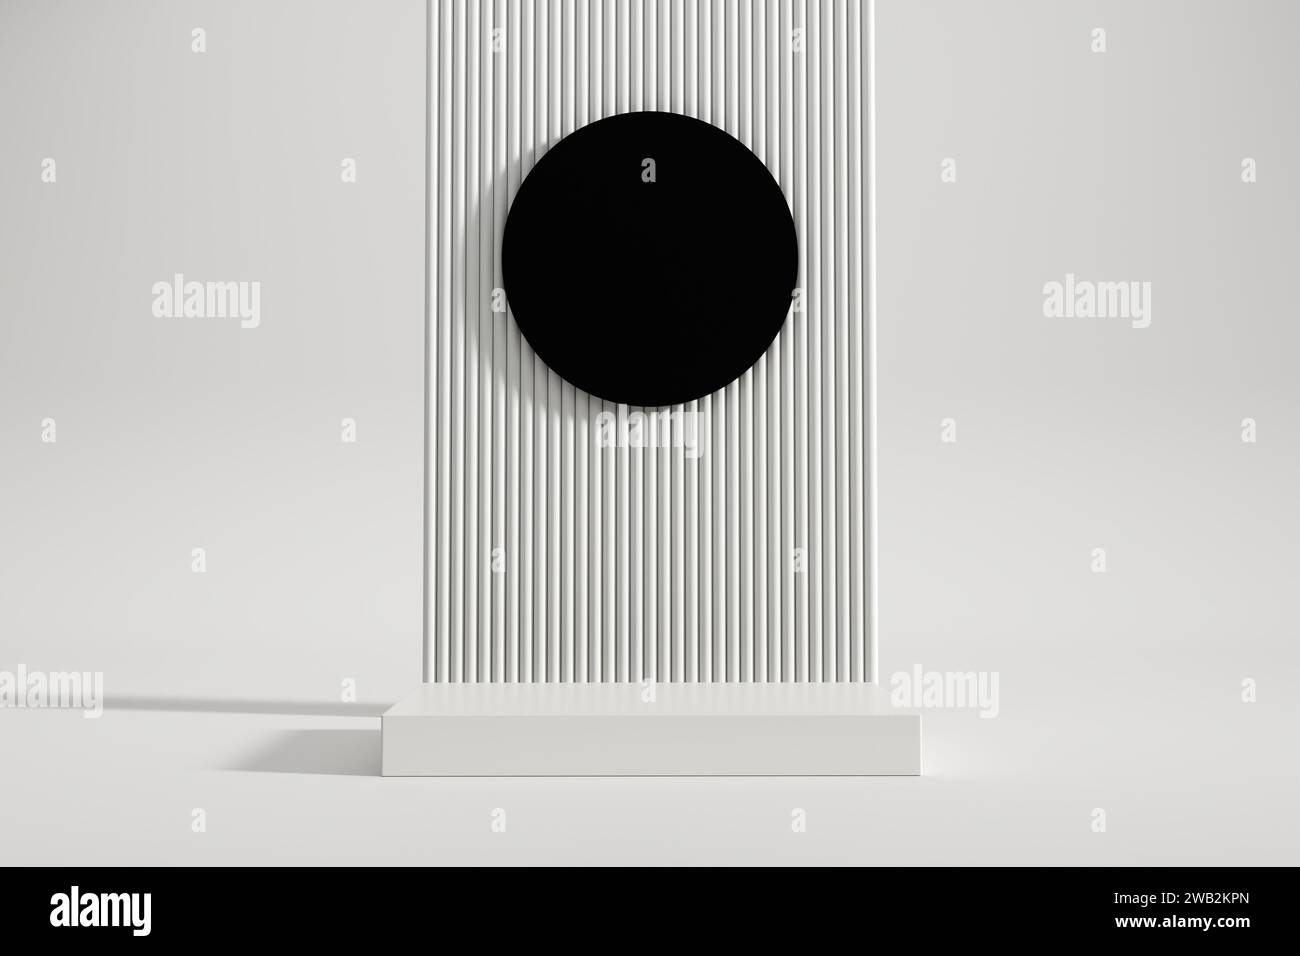 Minimalistic rectangle white platform or podium with black circle and pipes background. Mock up template for advertising goods and products. 3D render Stock Photo